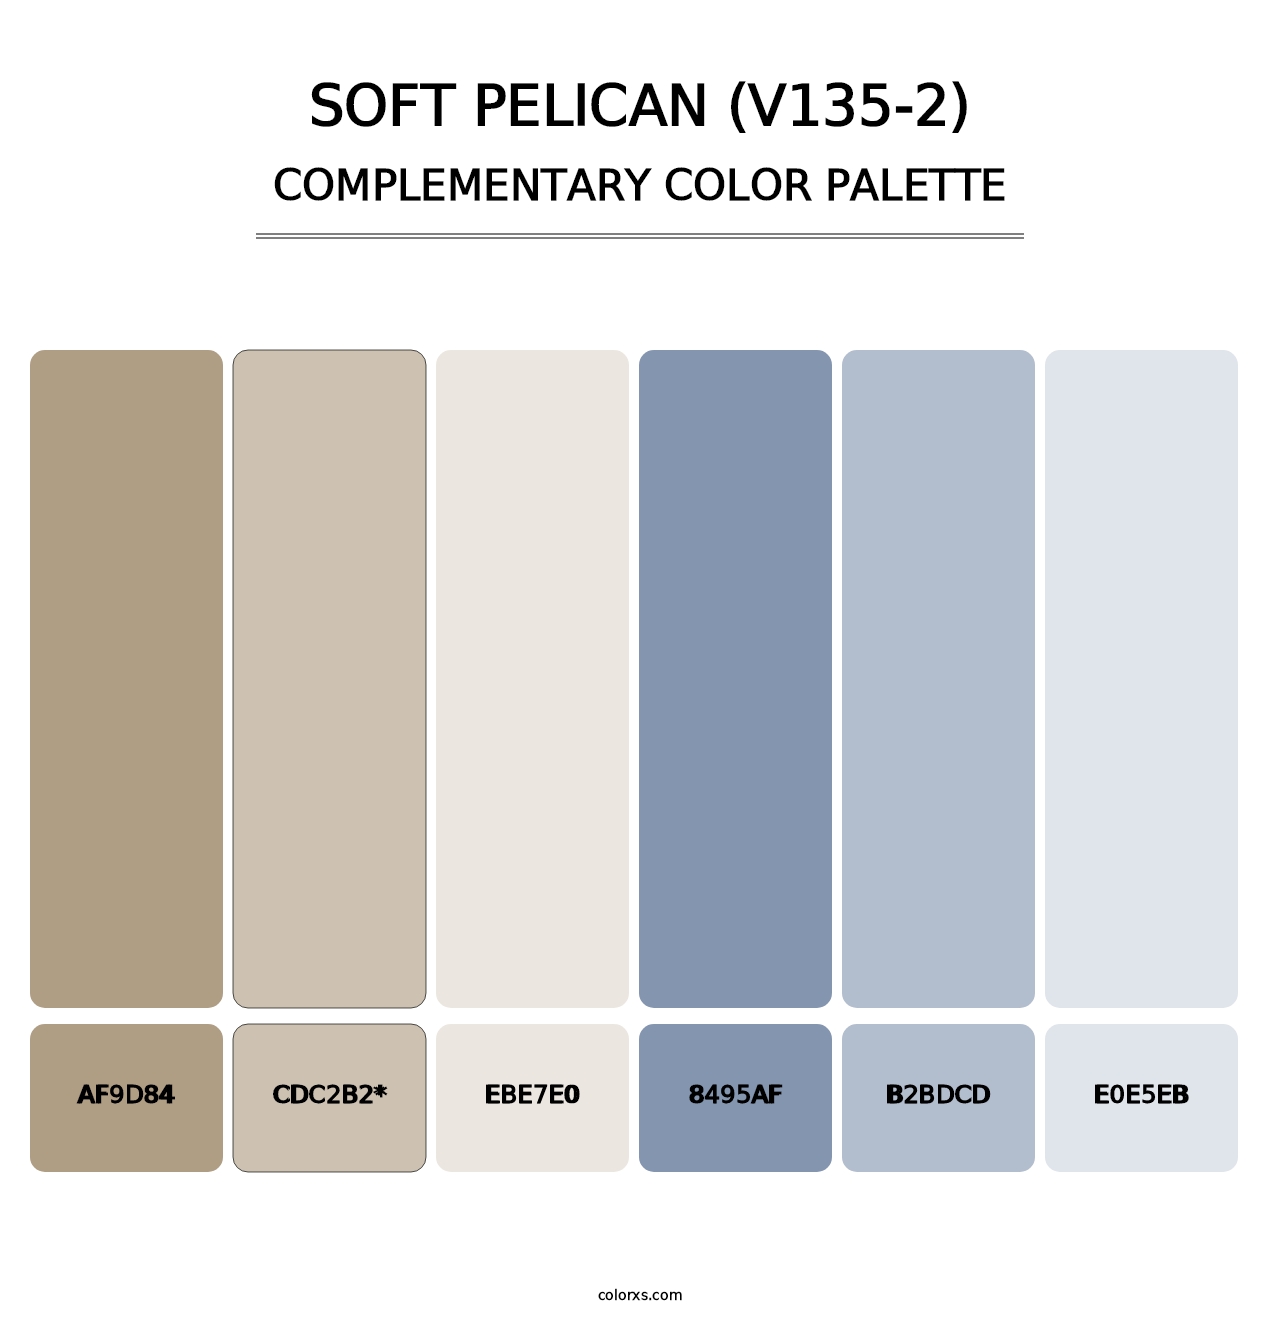 Soft Pelican (V135-2) - Complementary Color Palette